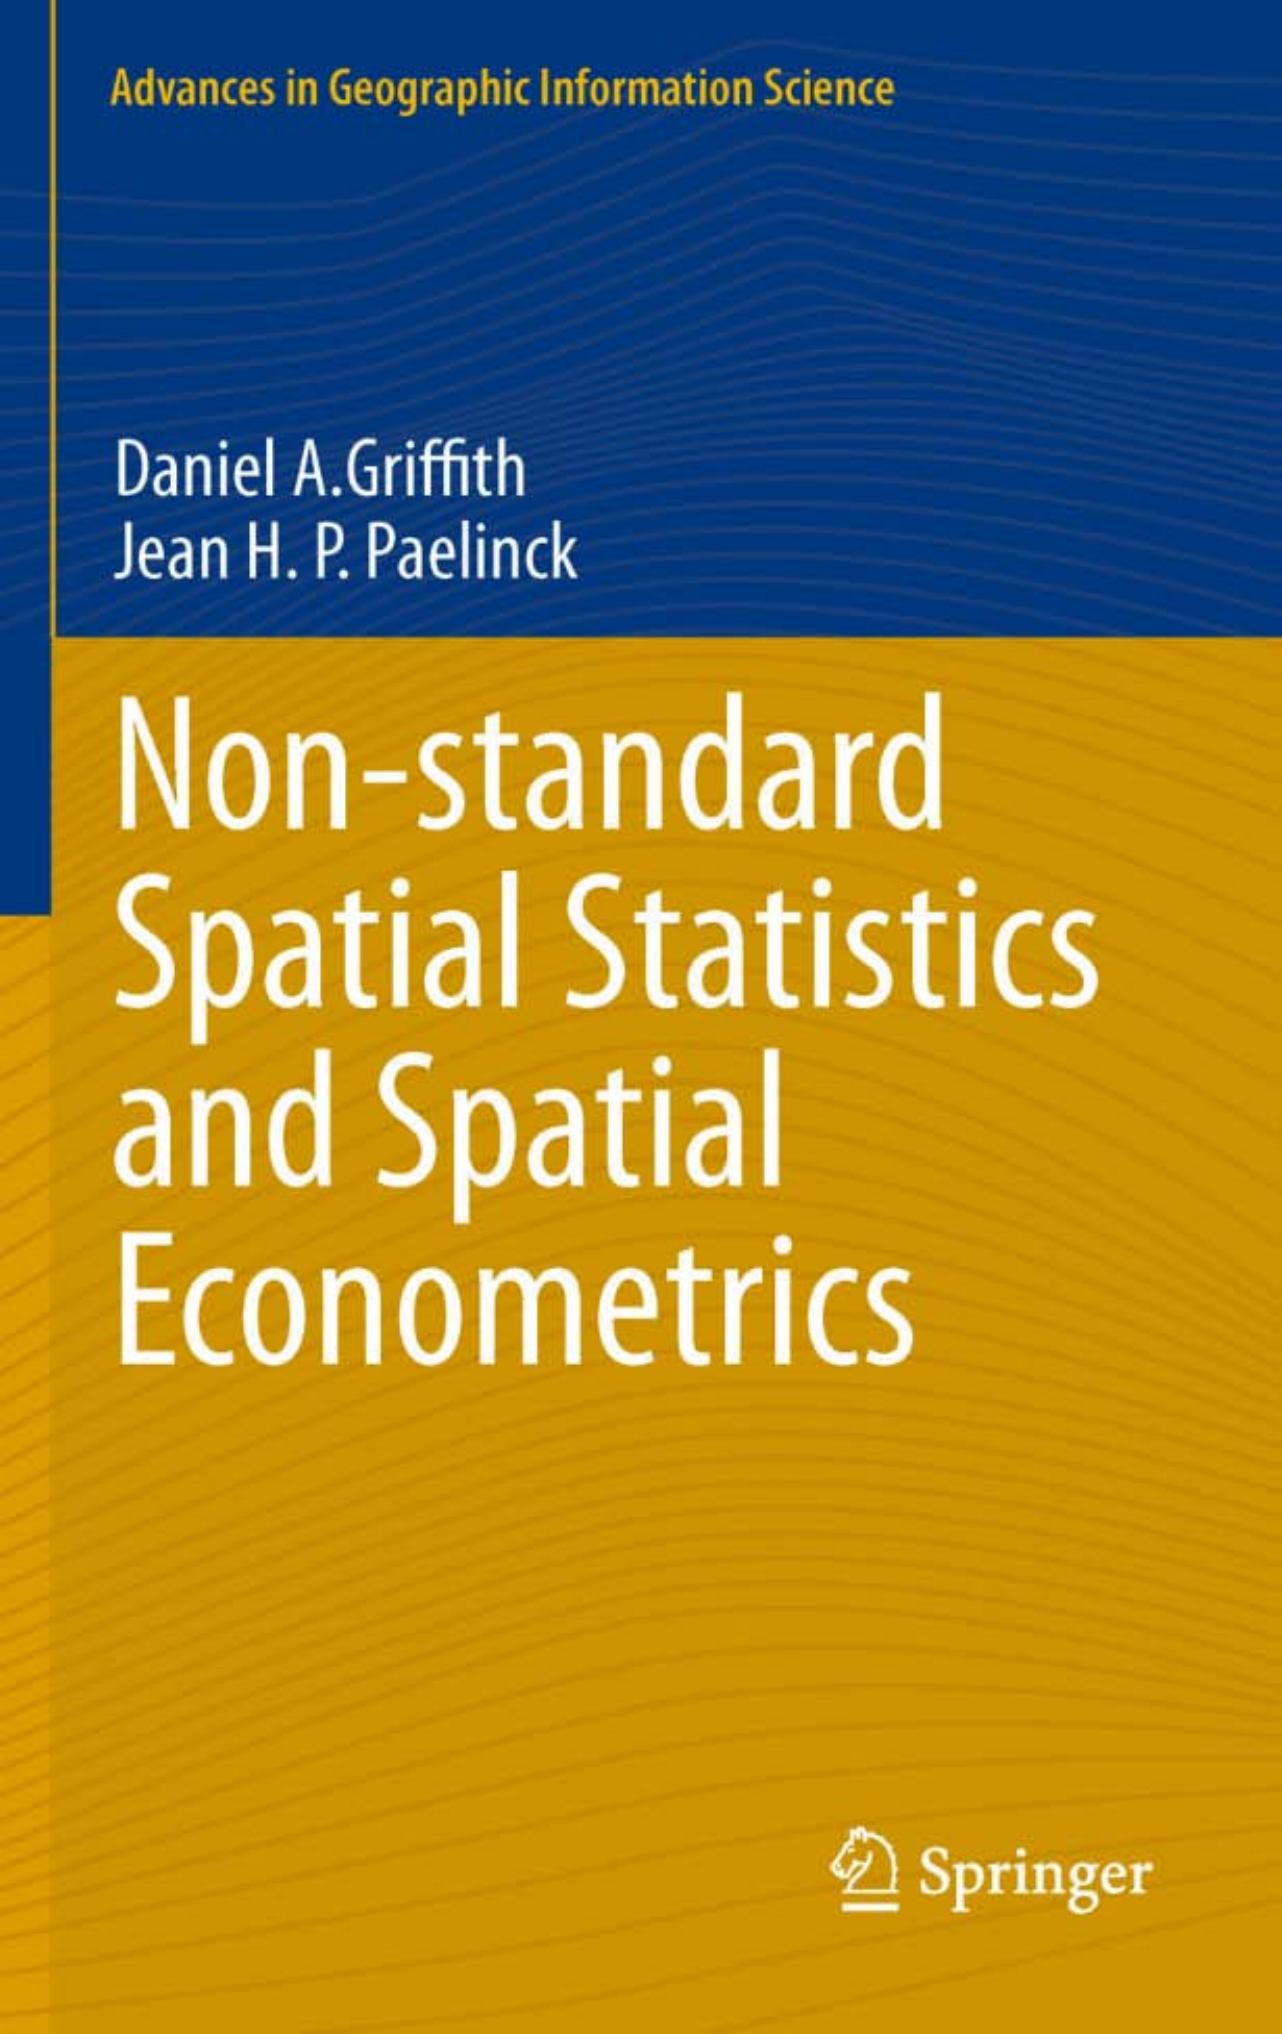 Non-standard Spatial Statistics and Spatial Econometrics (Advances in Geographic Information Science)